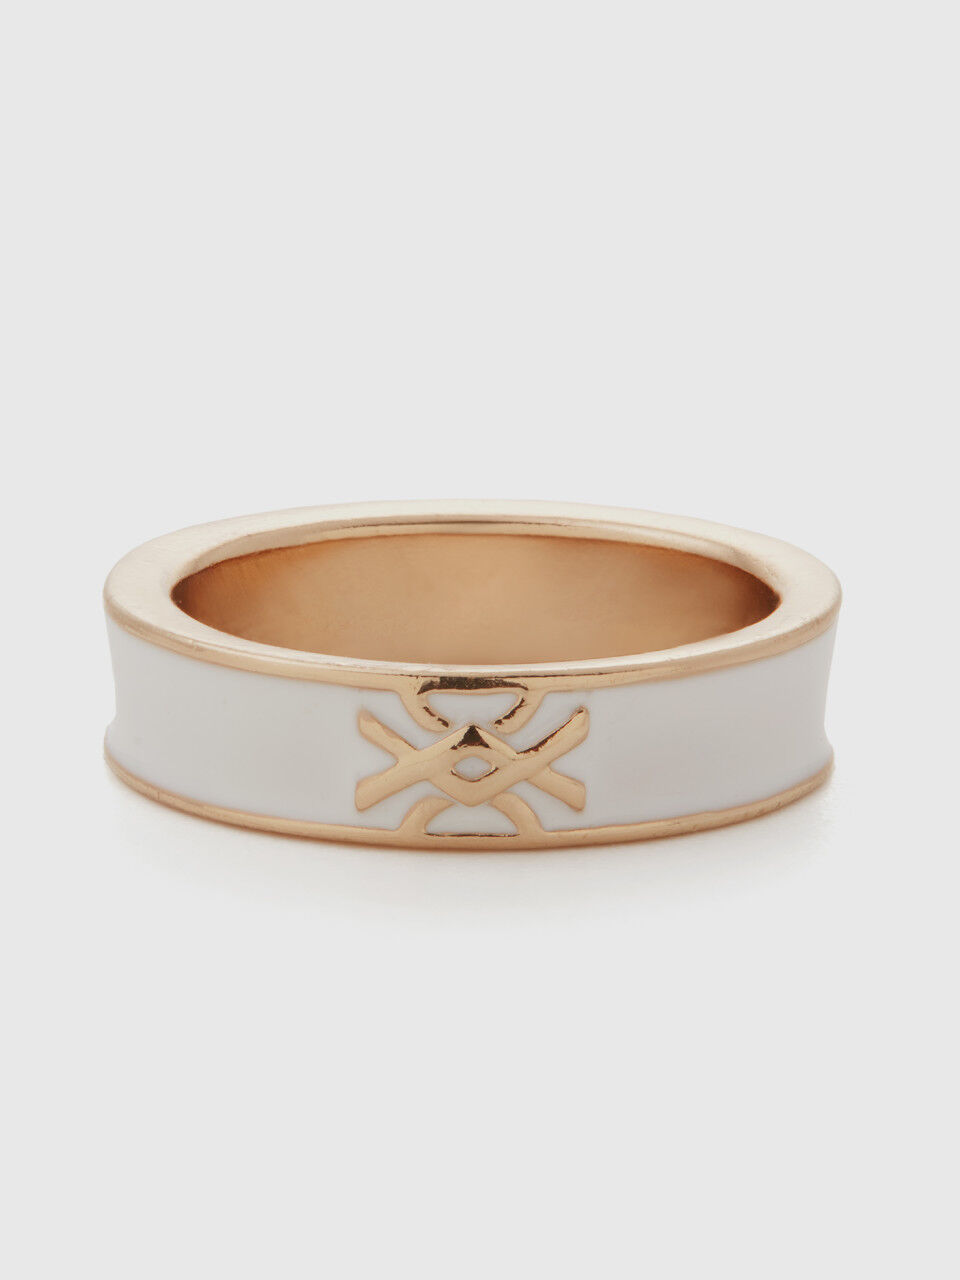 White band ring with logo